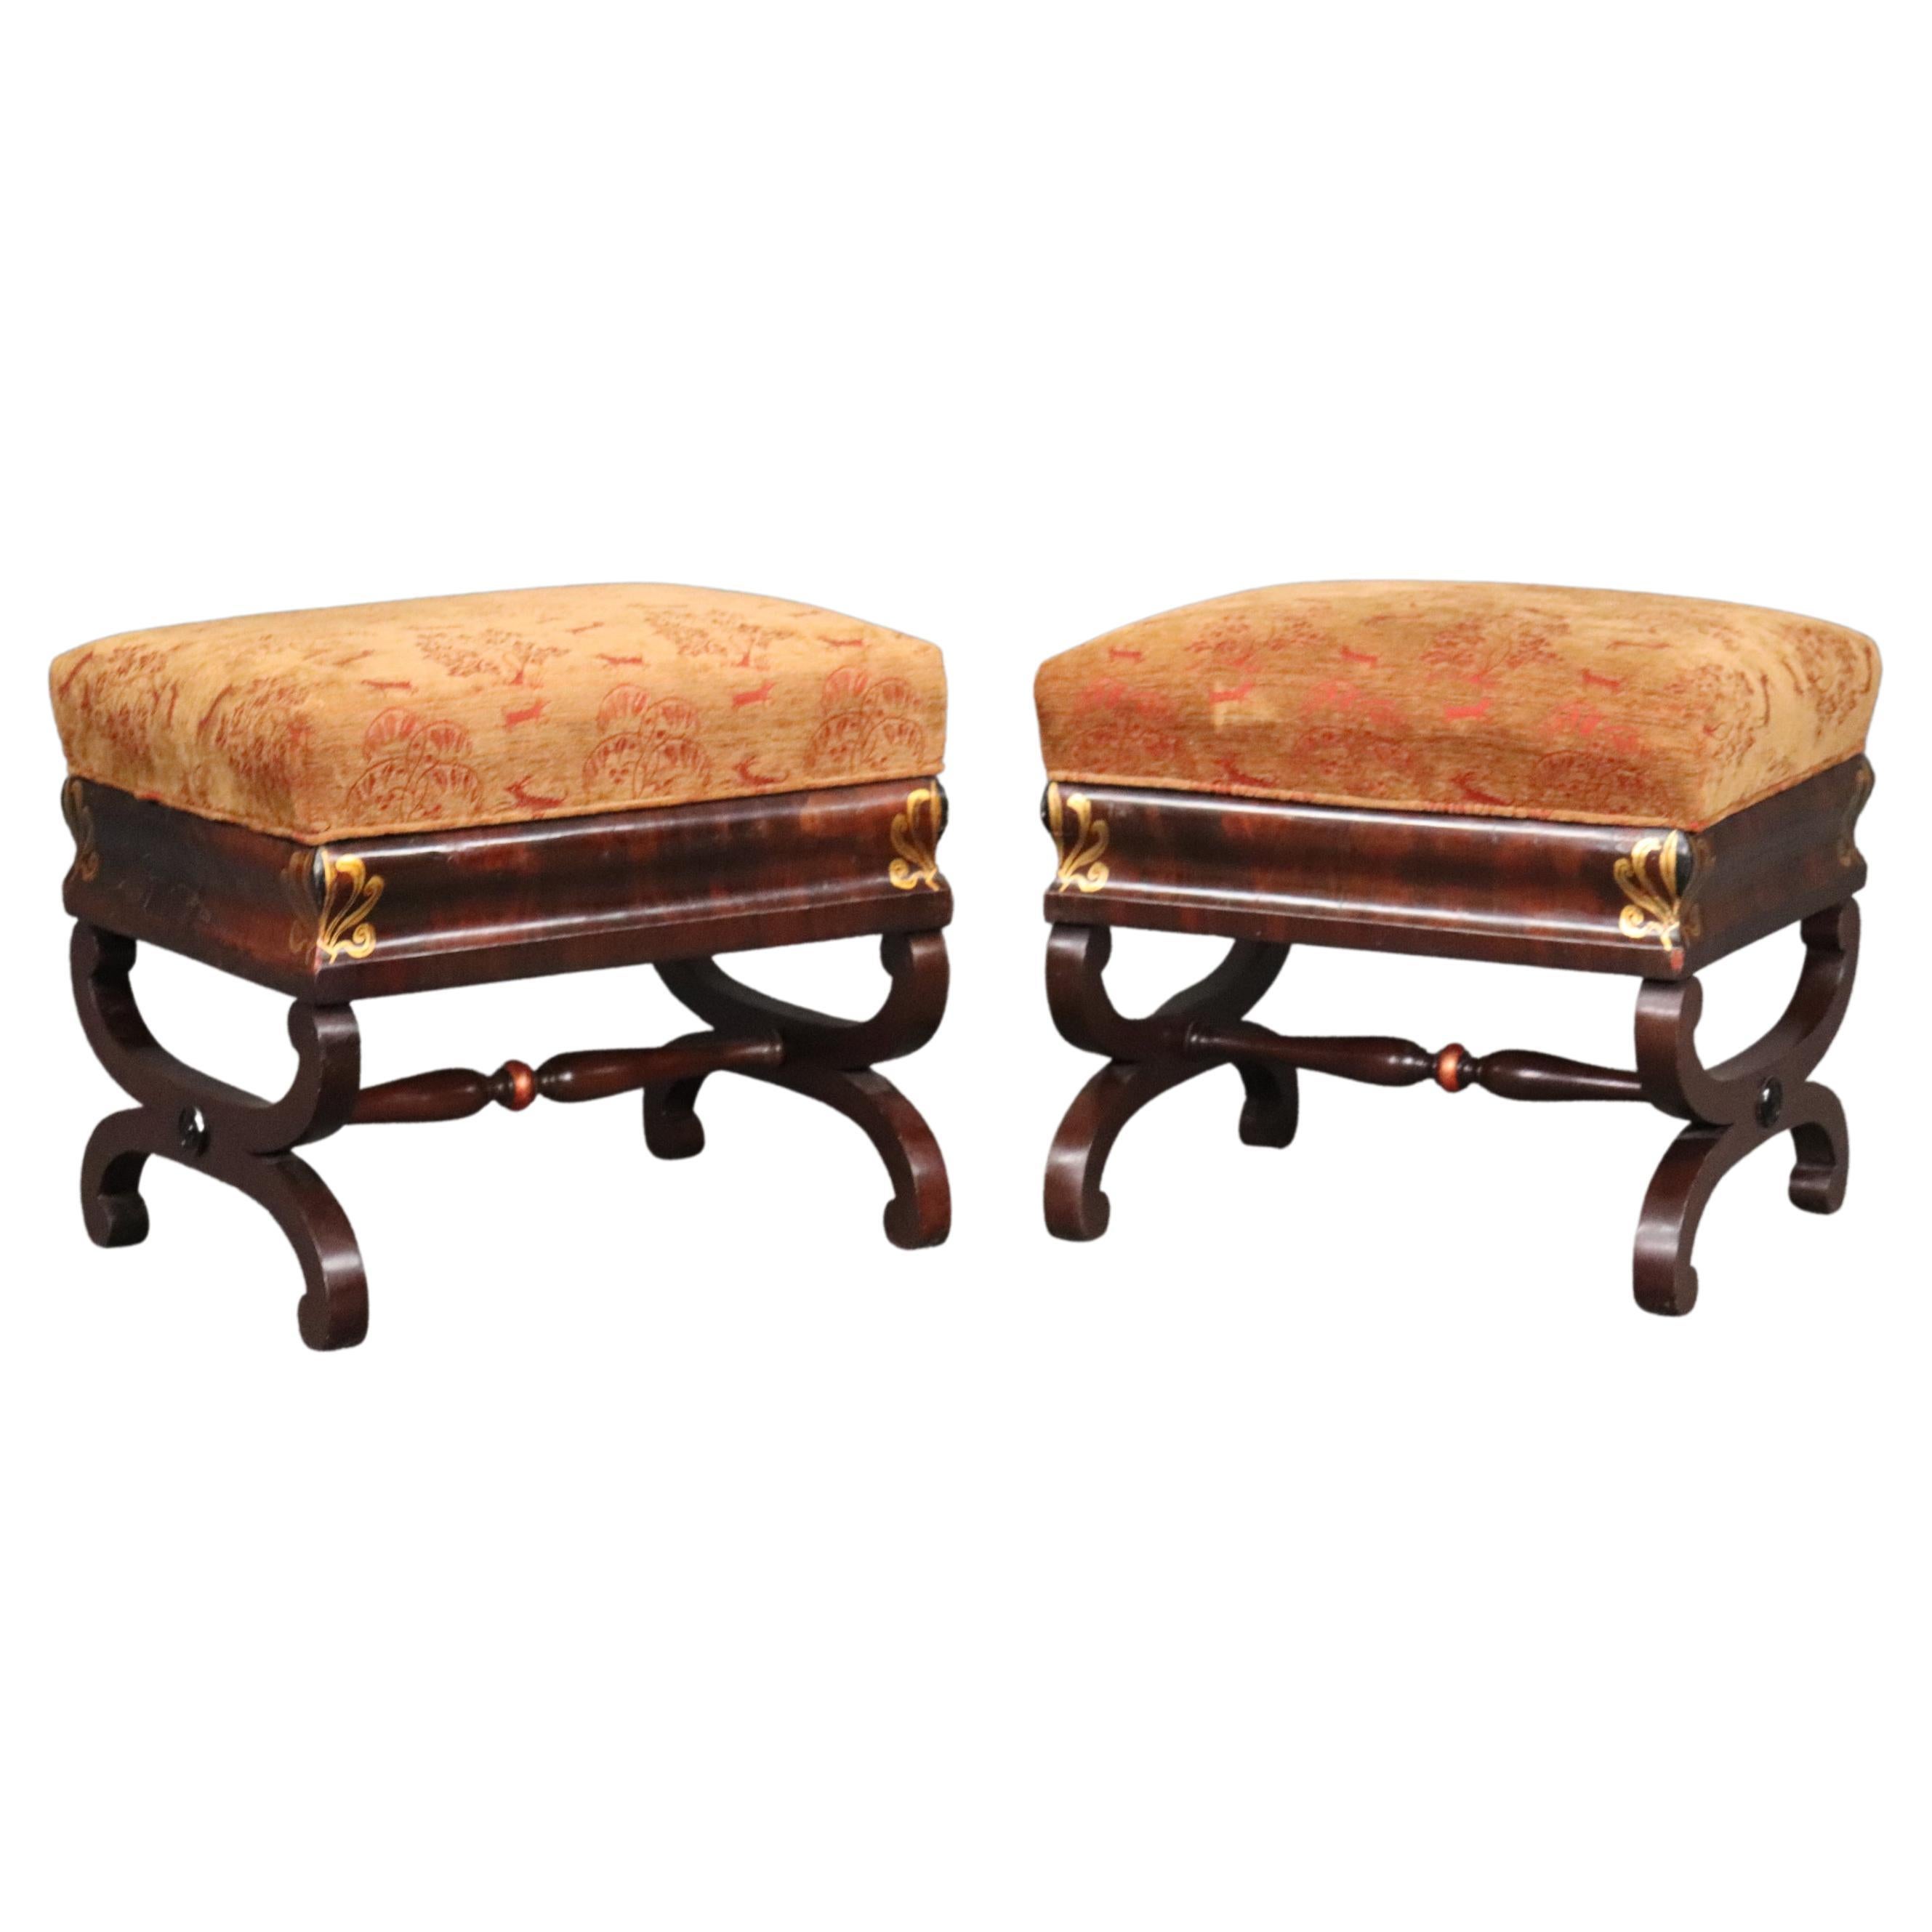 Pair If Empire Stools with Gold Gilded Anthemia circa 1840s